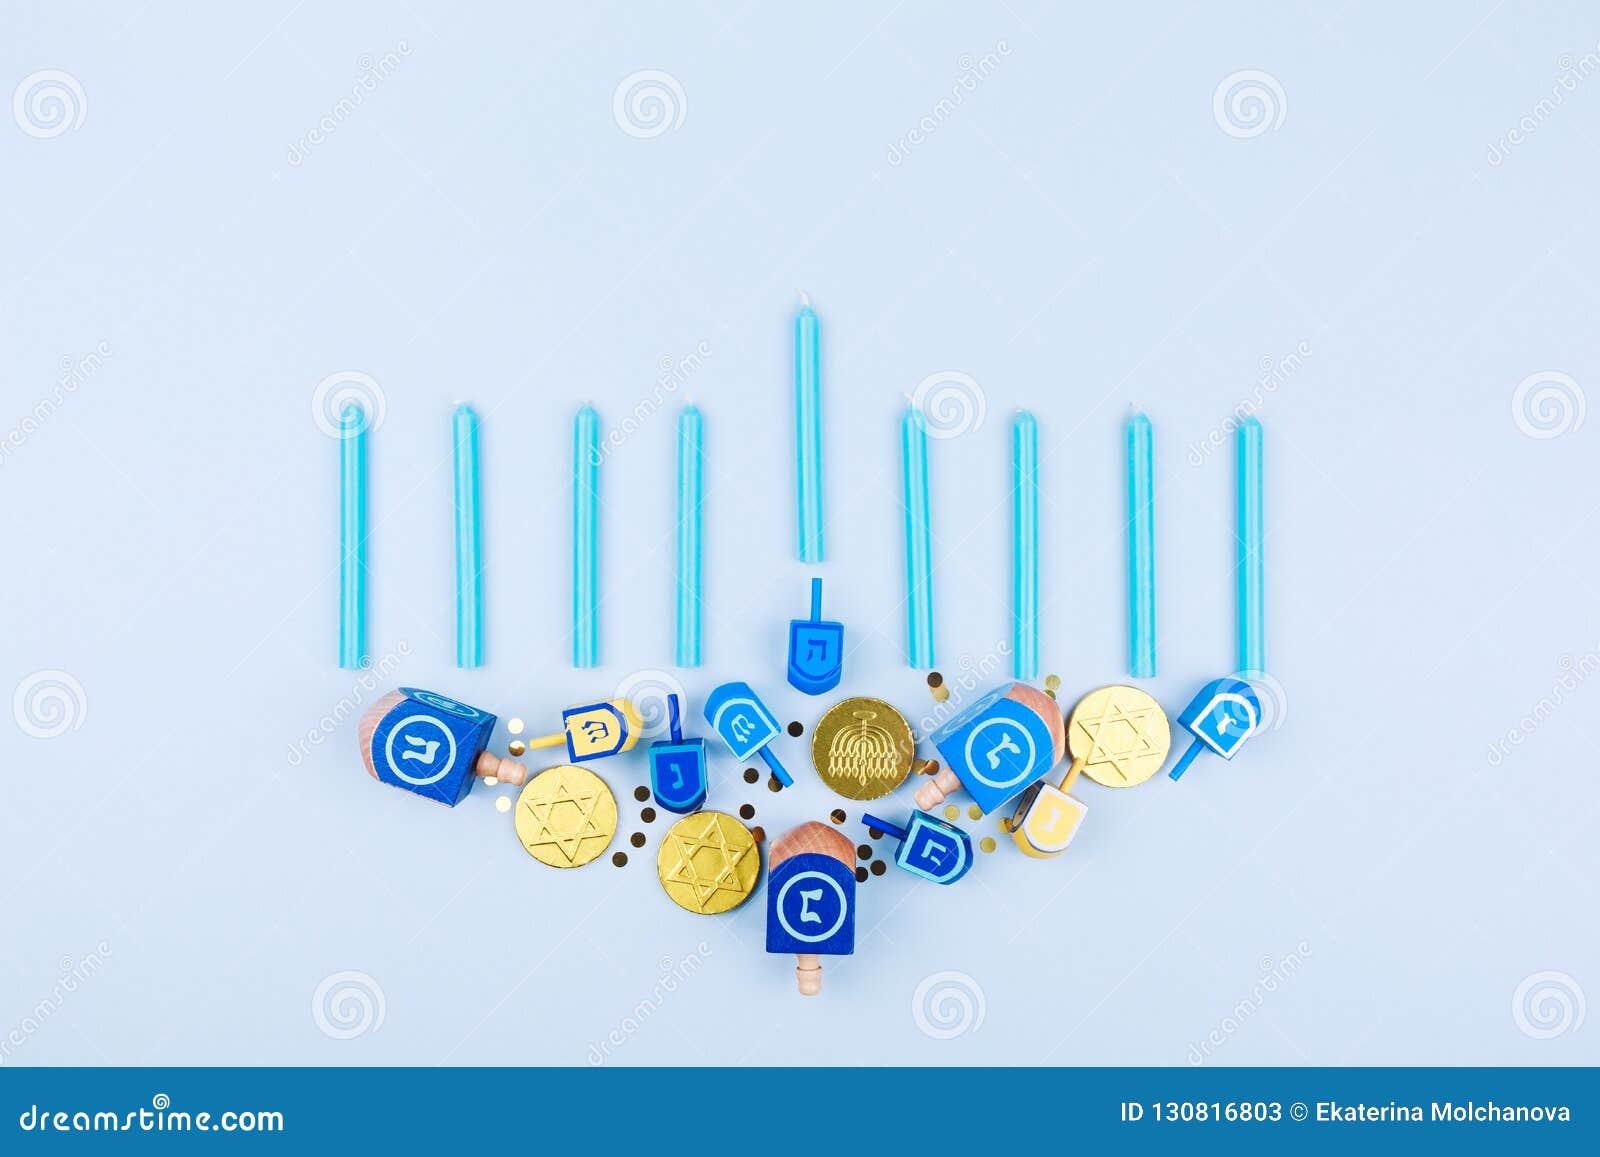 blue background with menora made of dreidels and chocolate coins